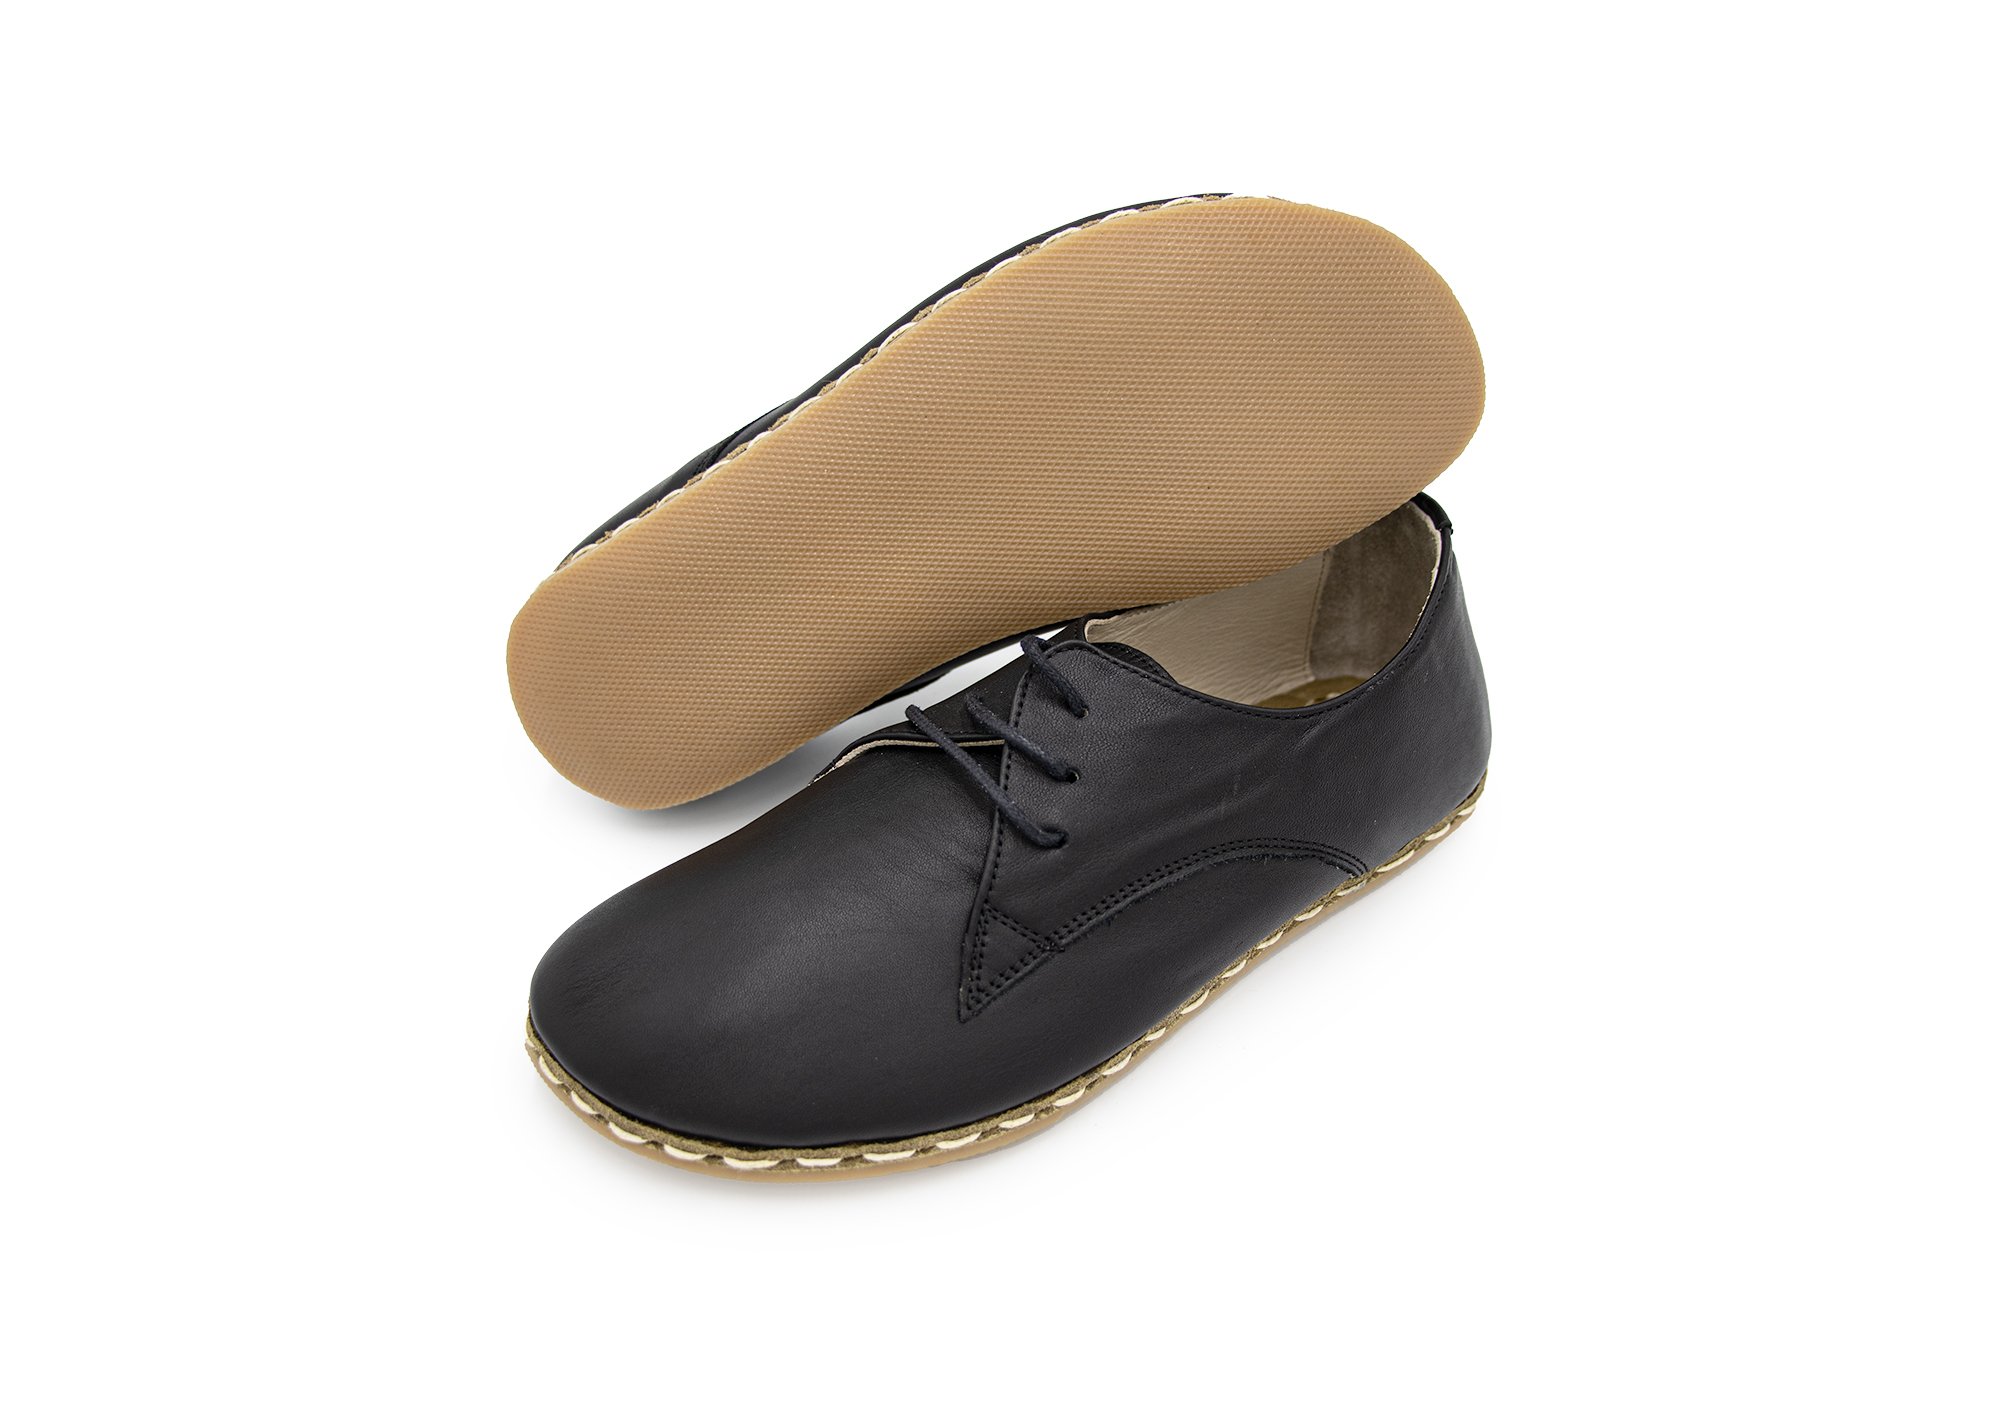 Barefoot Black Derby Shoes — AKANA | HANDCRAFTED LEATHER SHOES, SANDALS ...